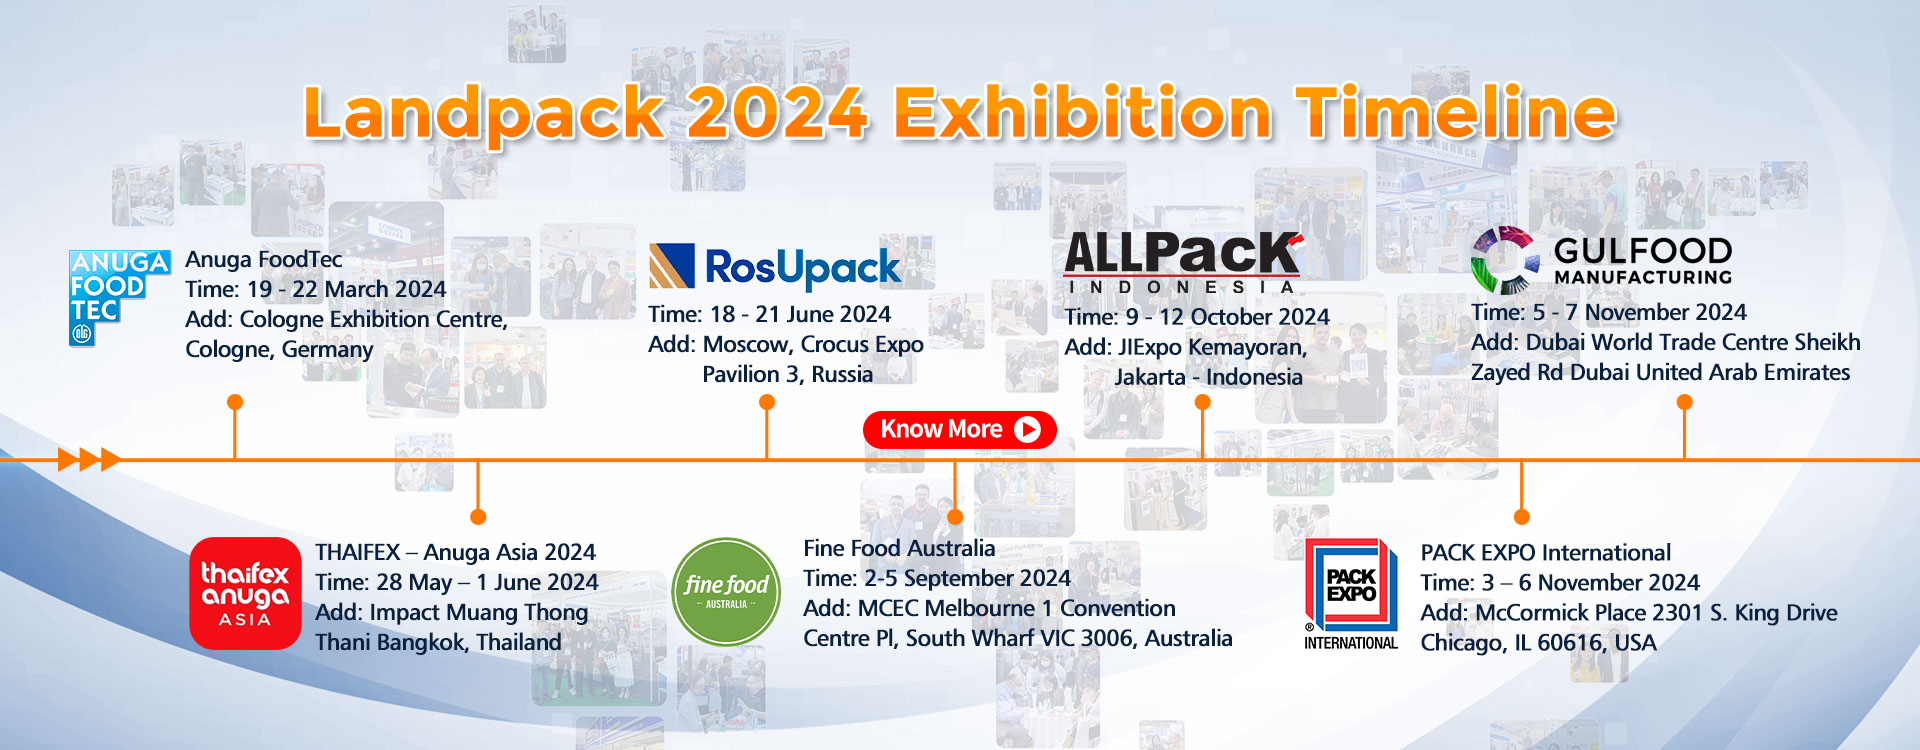 The Following Is Our Exhibition Timeline In 2024, Welcome To Visit Our Exhibition!